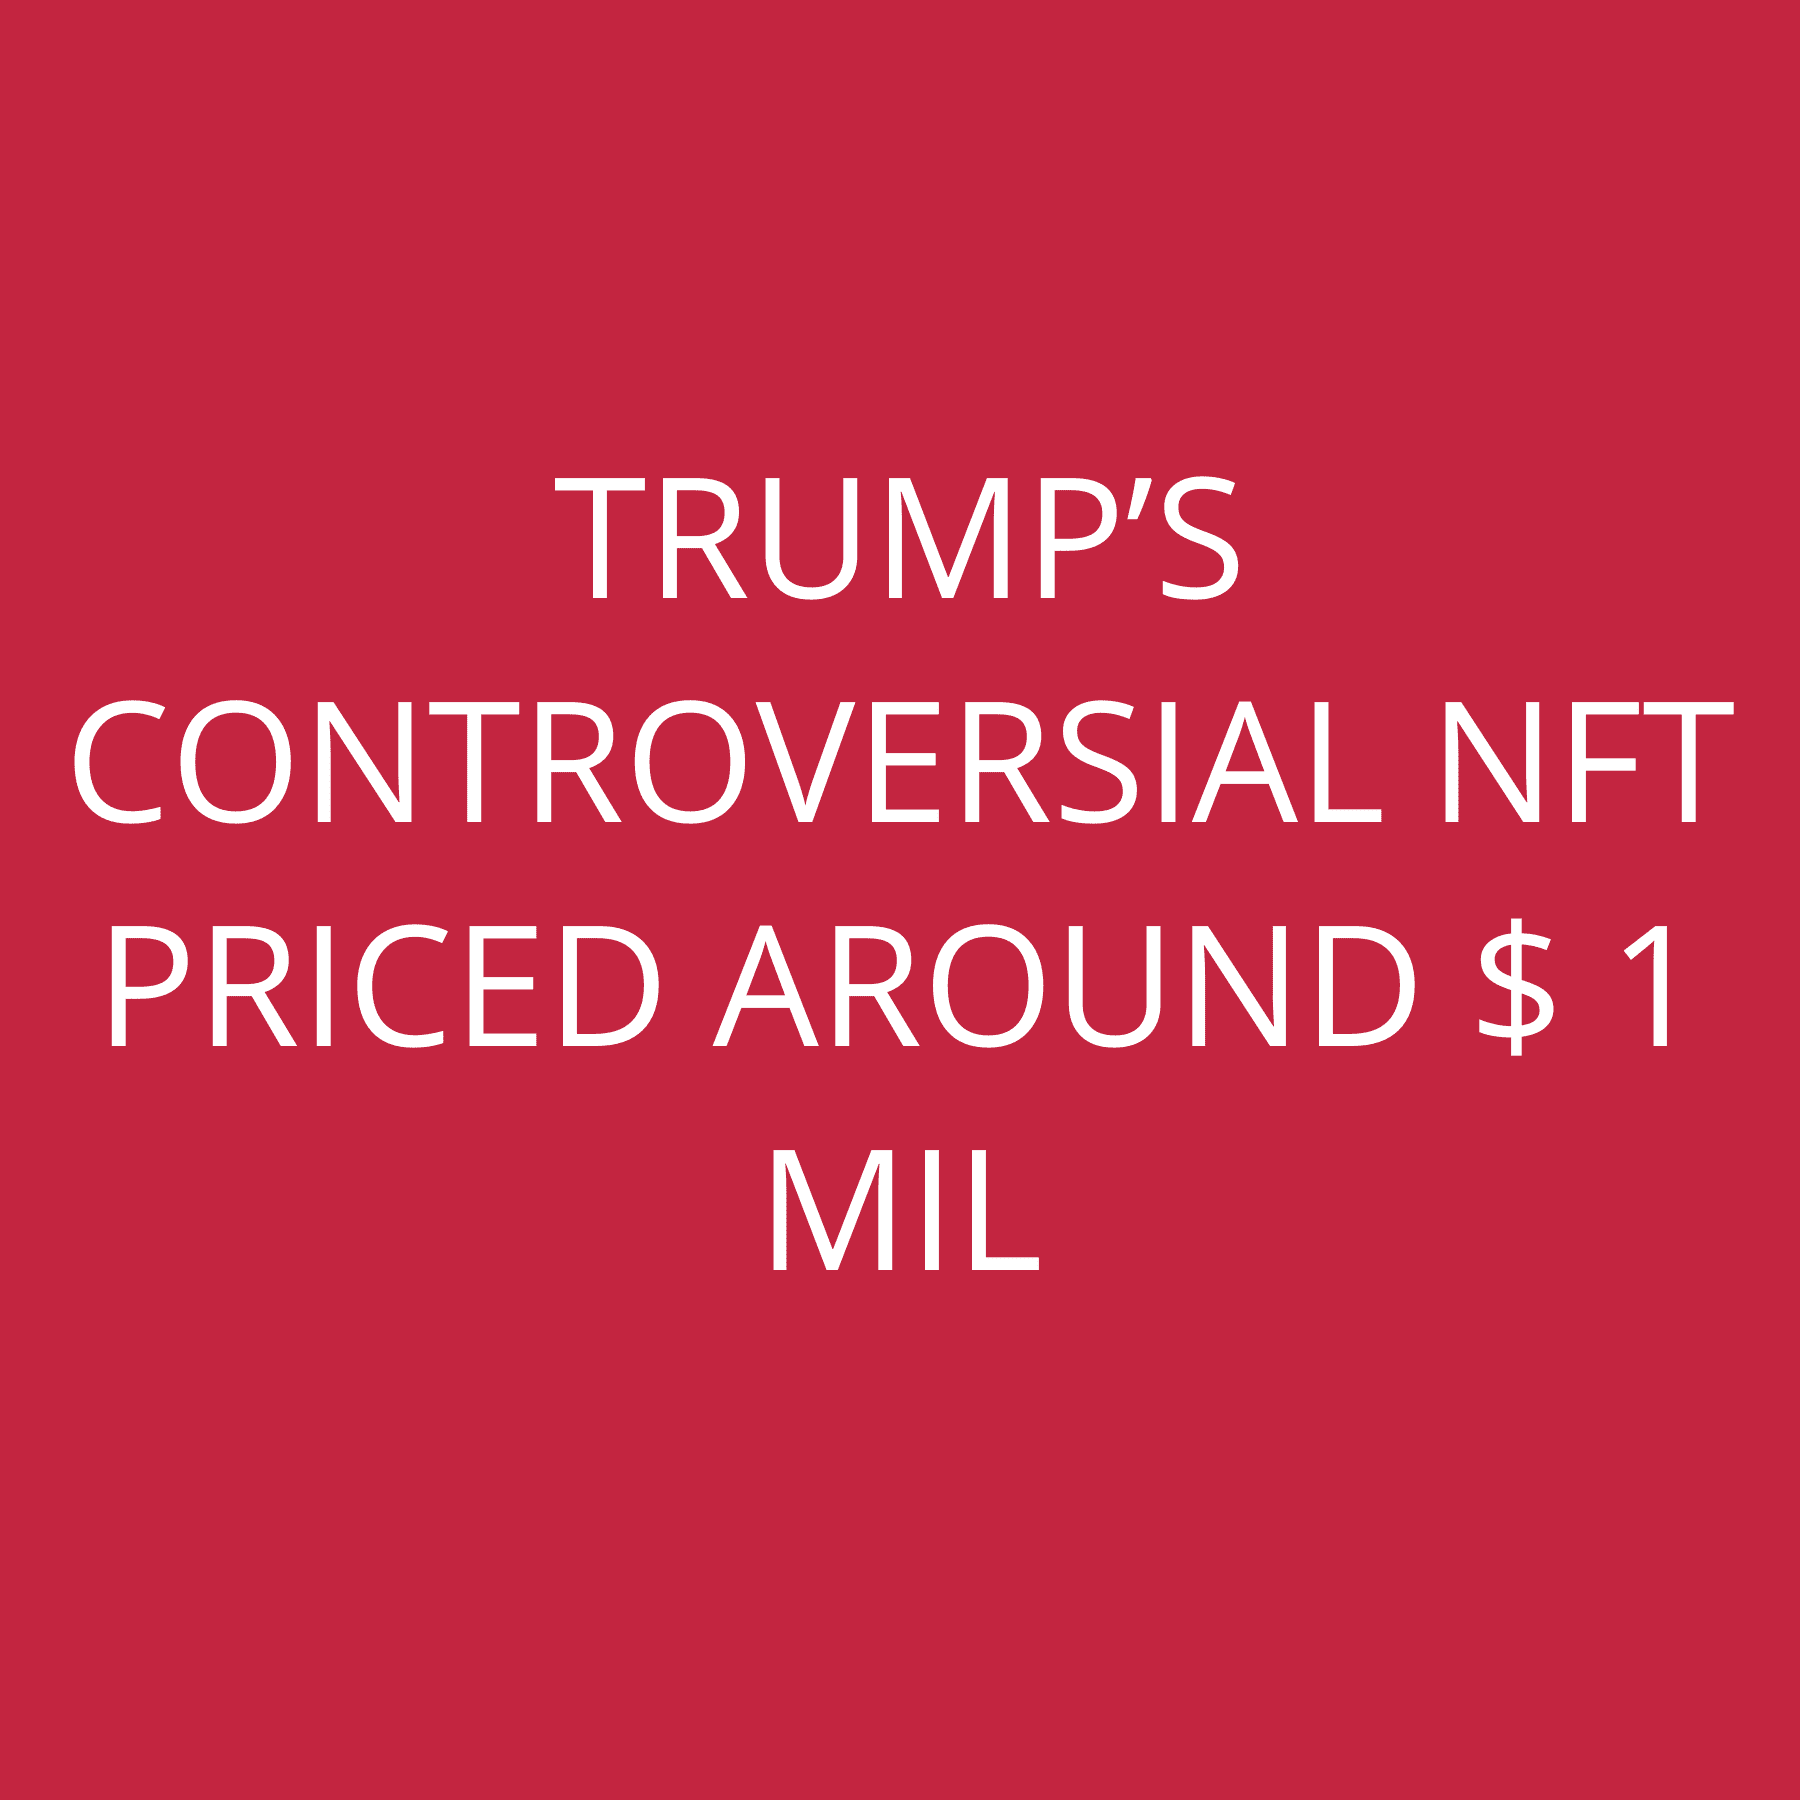 Trump’s controversial NFT priced around $ 1 Mil